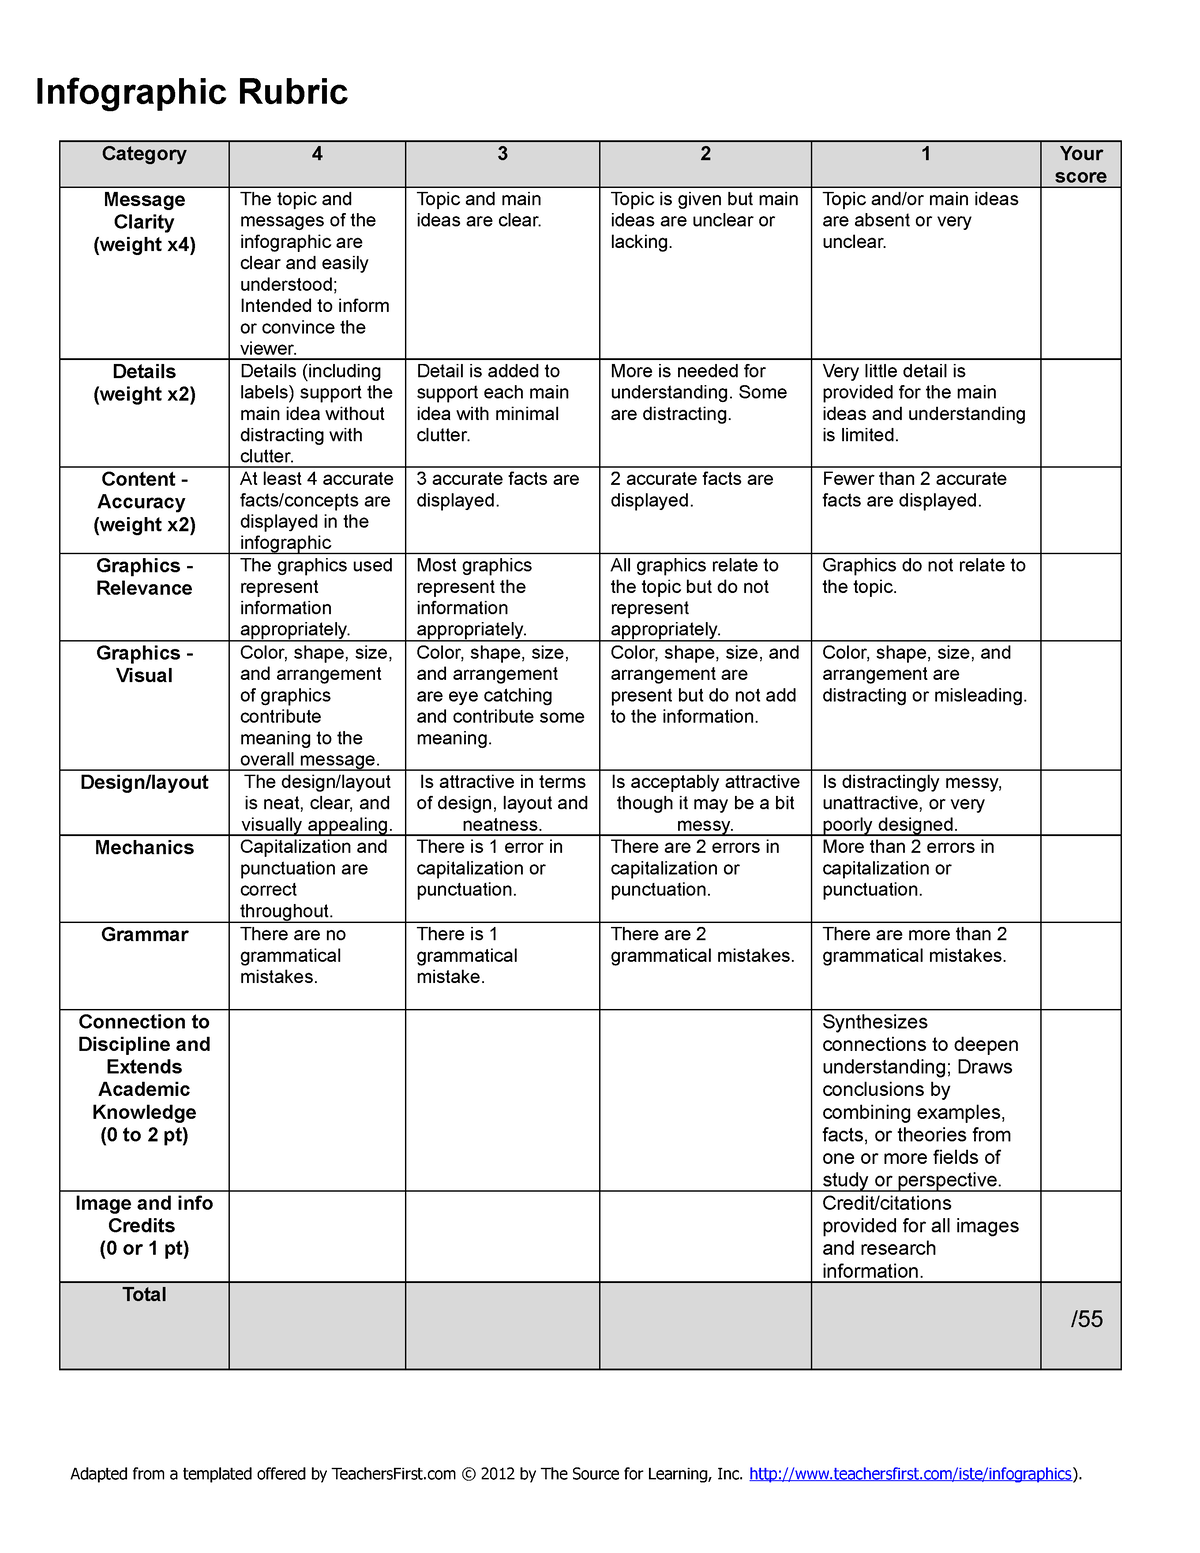 rubric for infographic